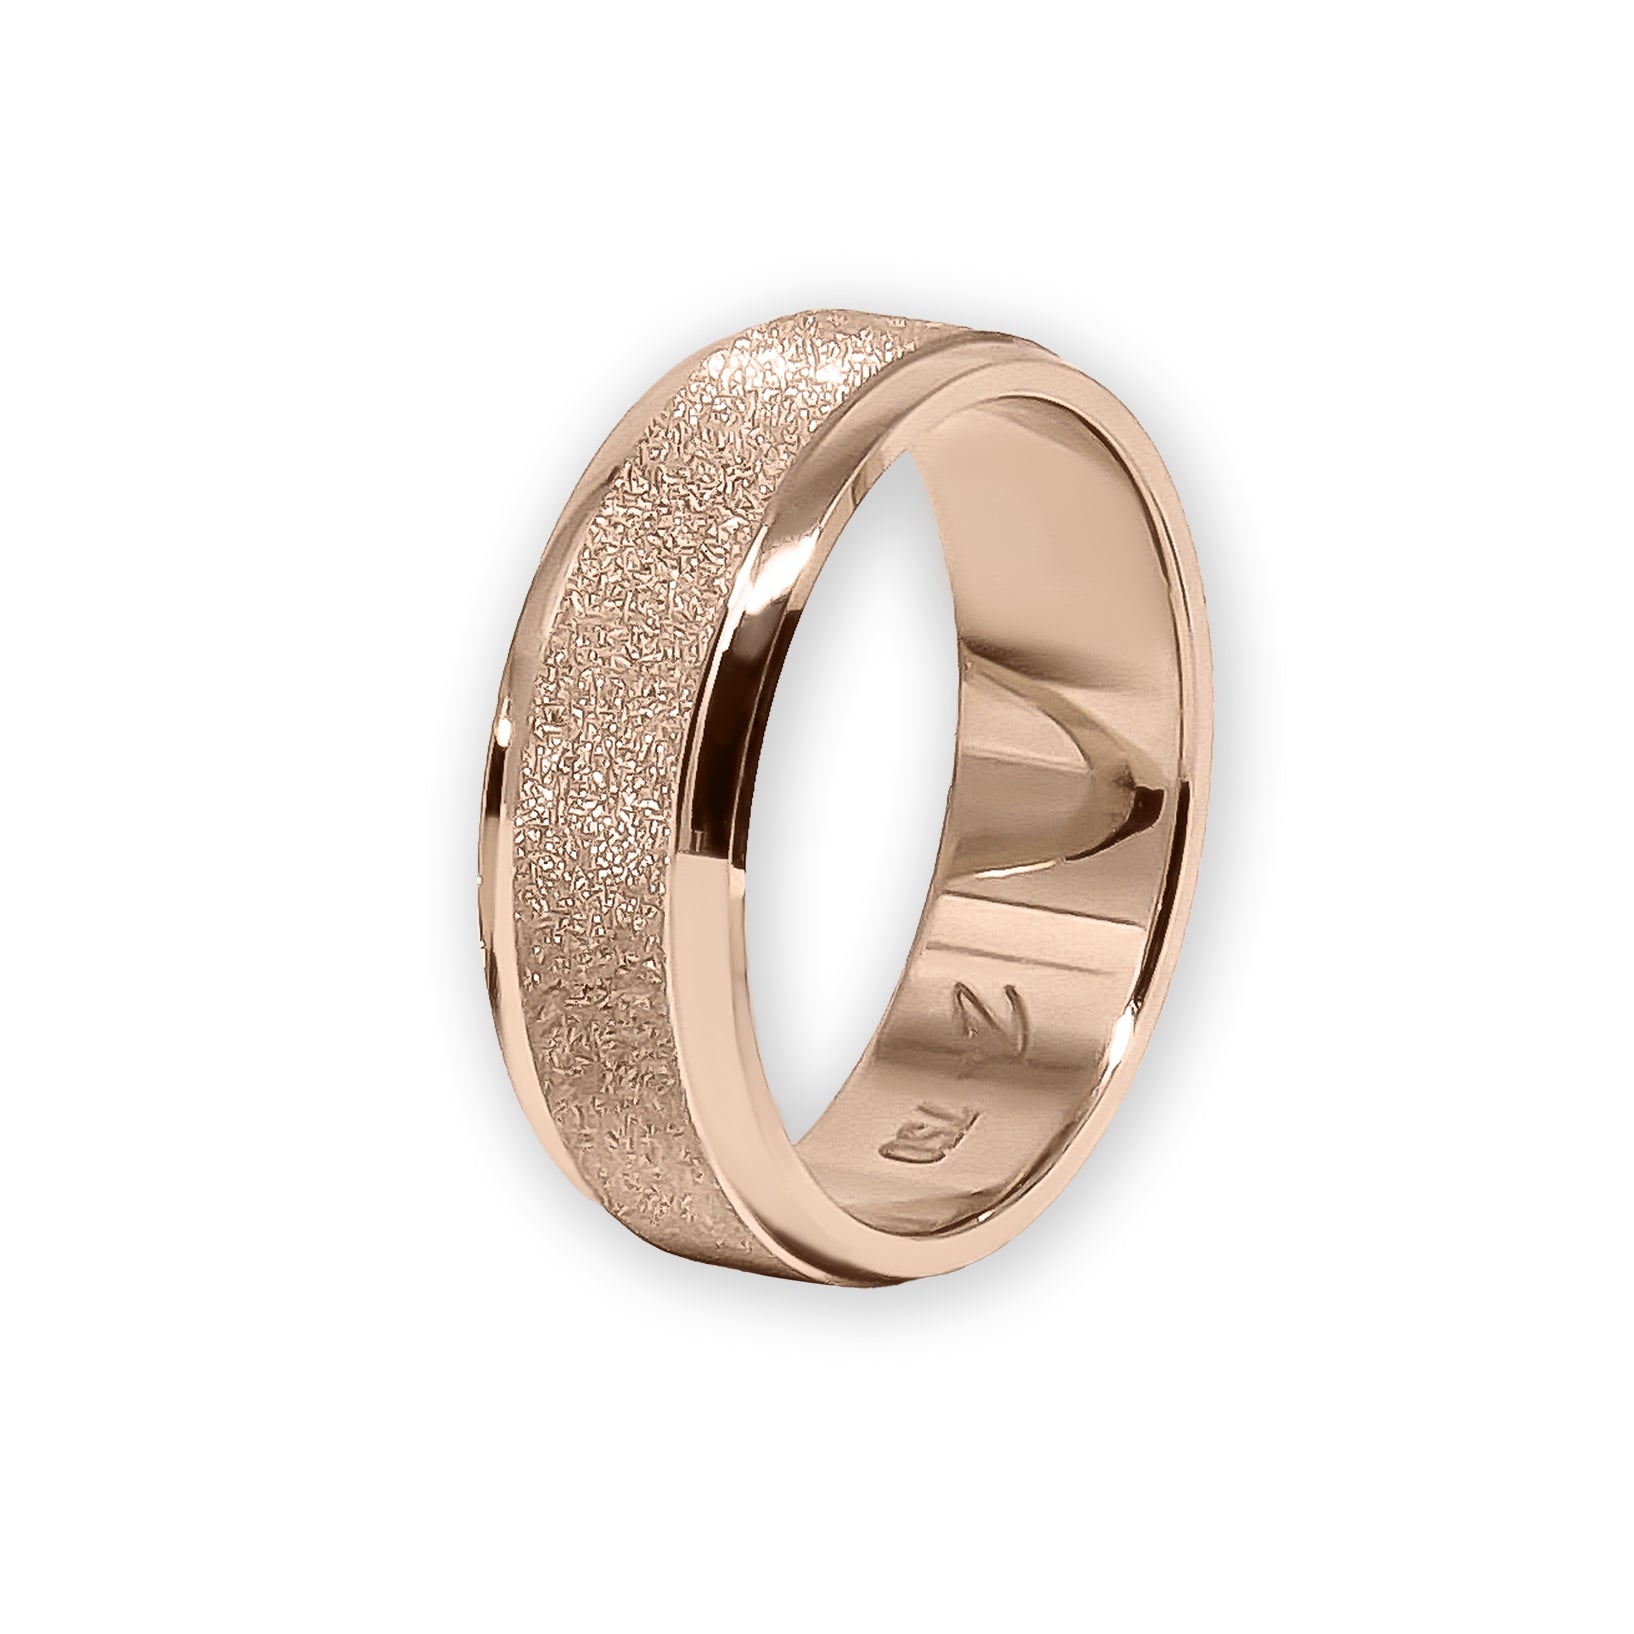 Ring EARTH IS ROUND 6mm red gold 18k 750